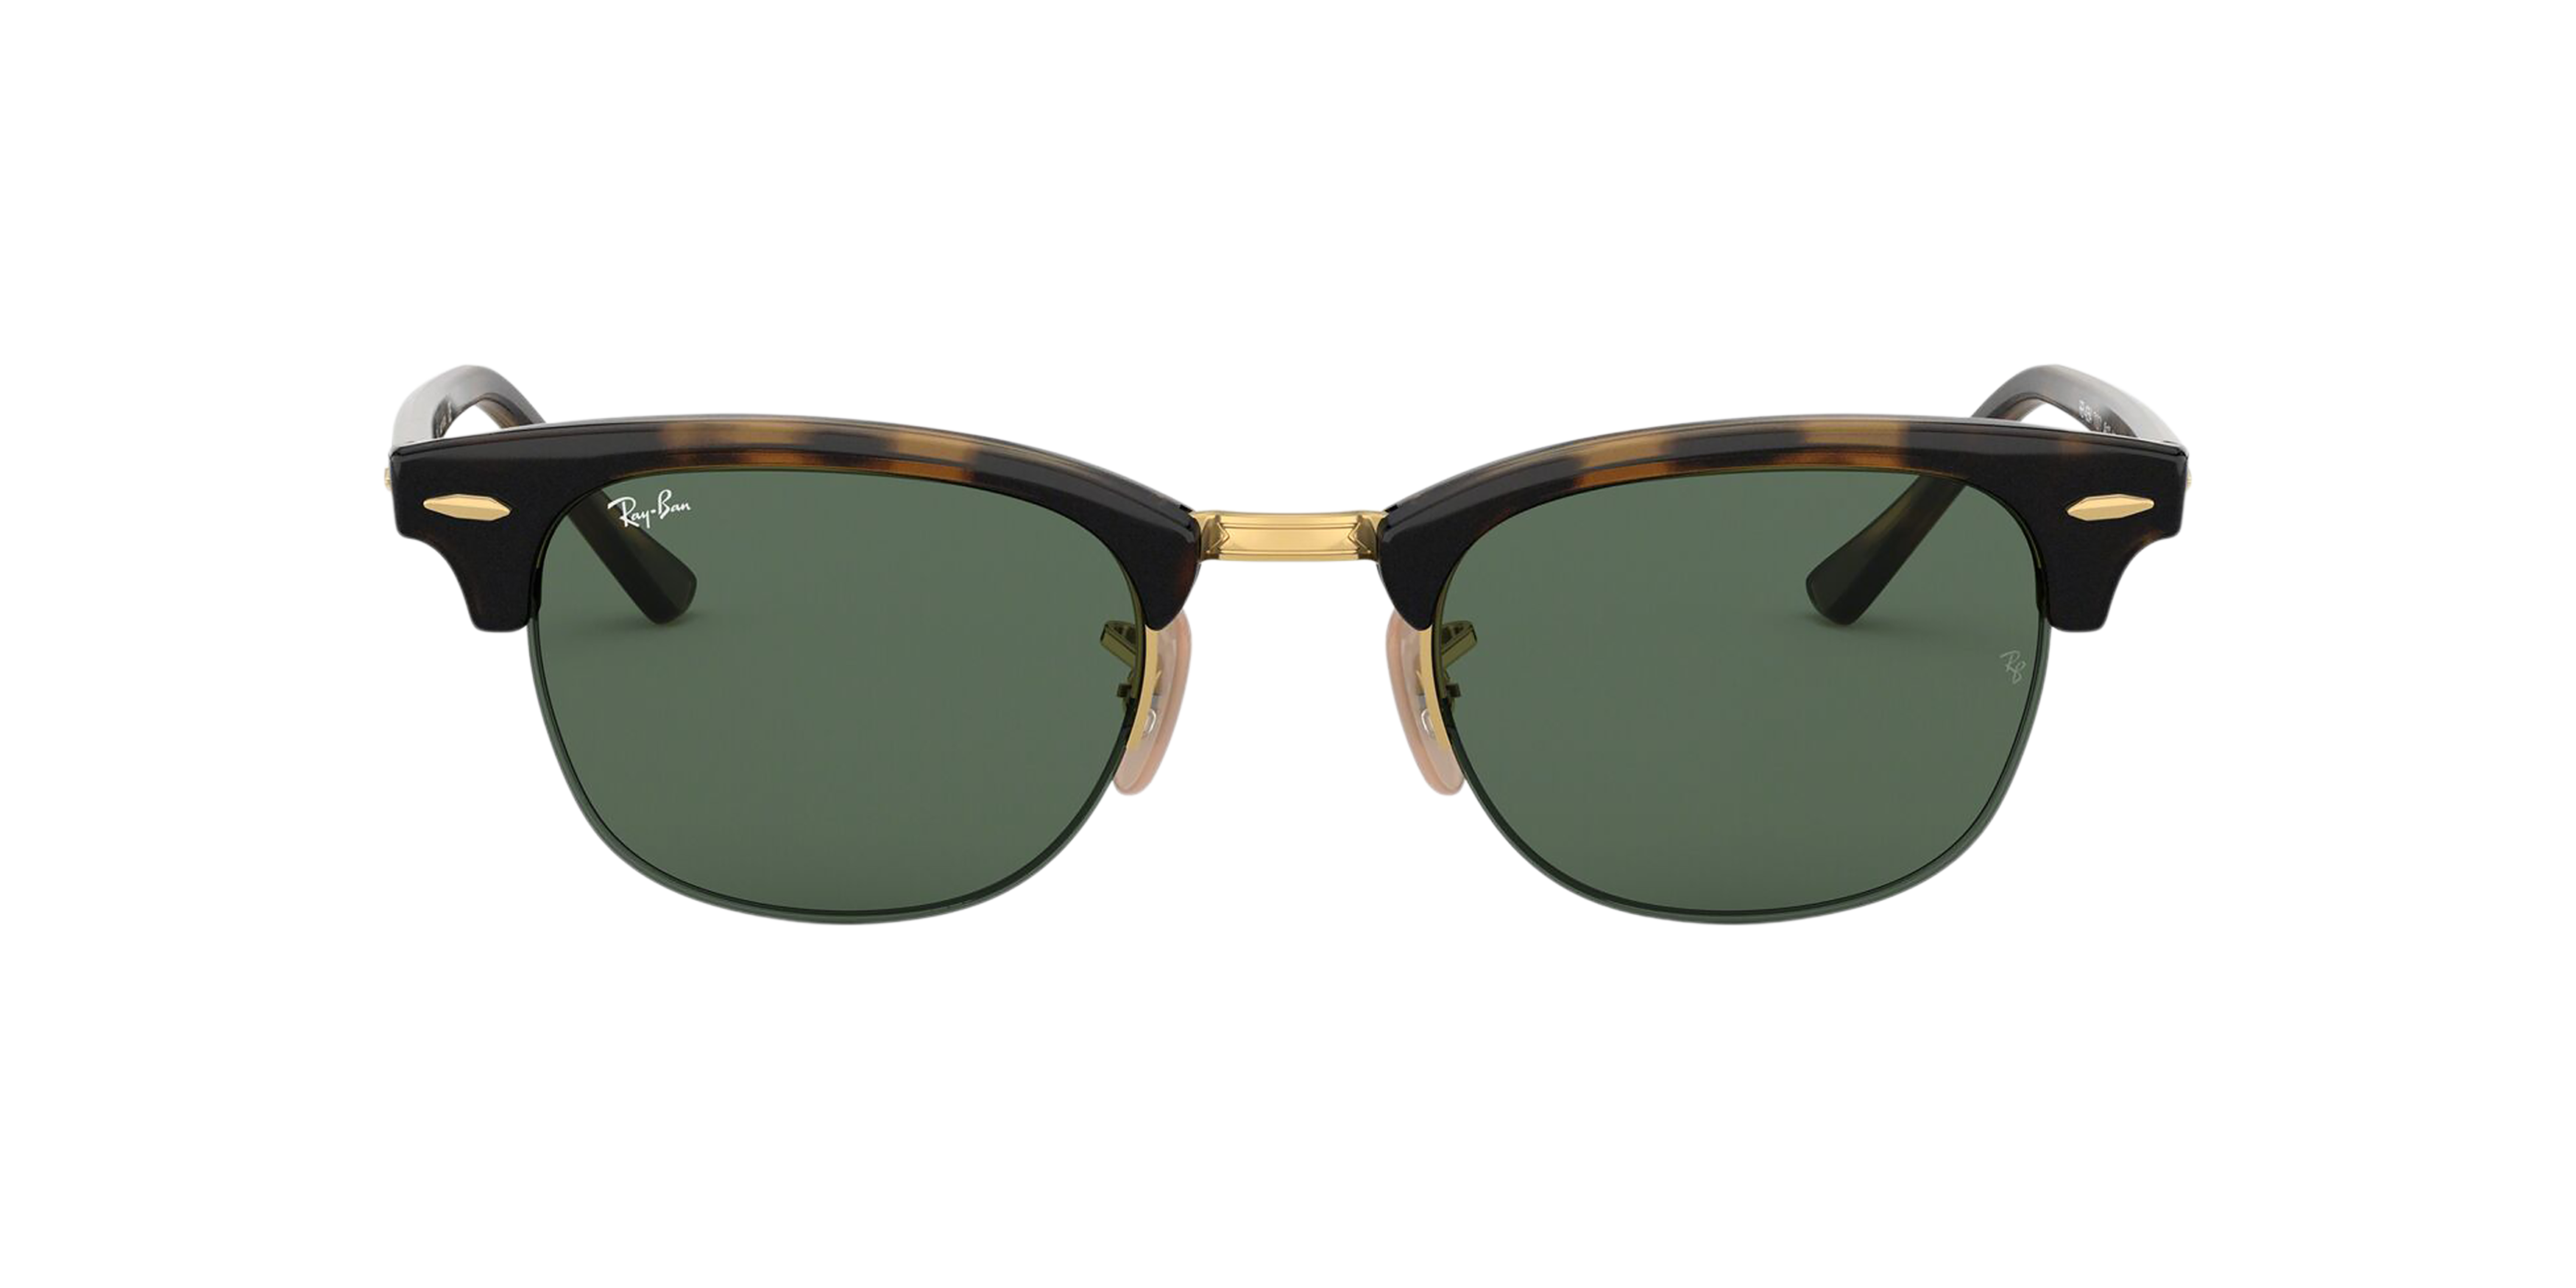 [products.image.front] Ray-Ban RB4354 710/71